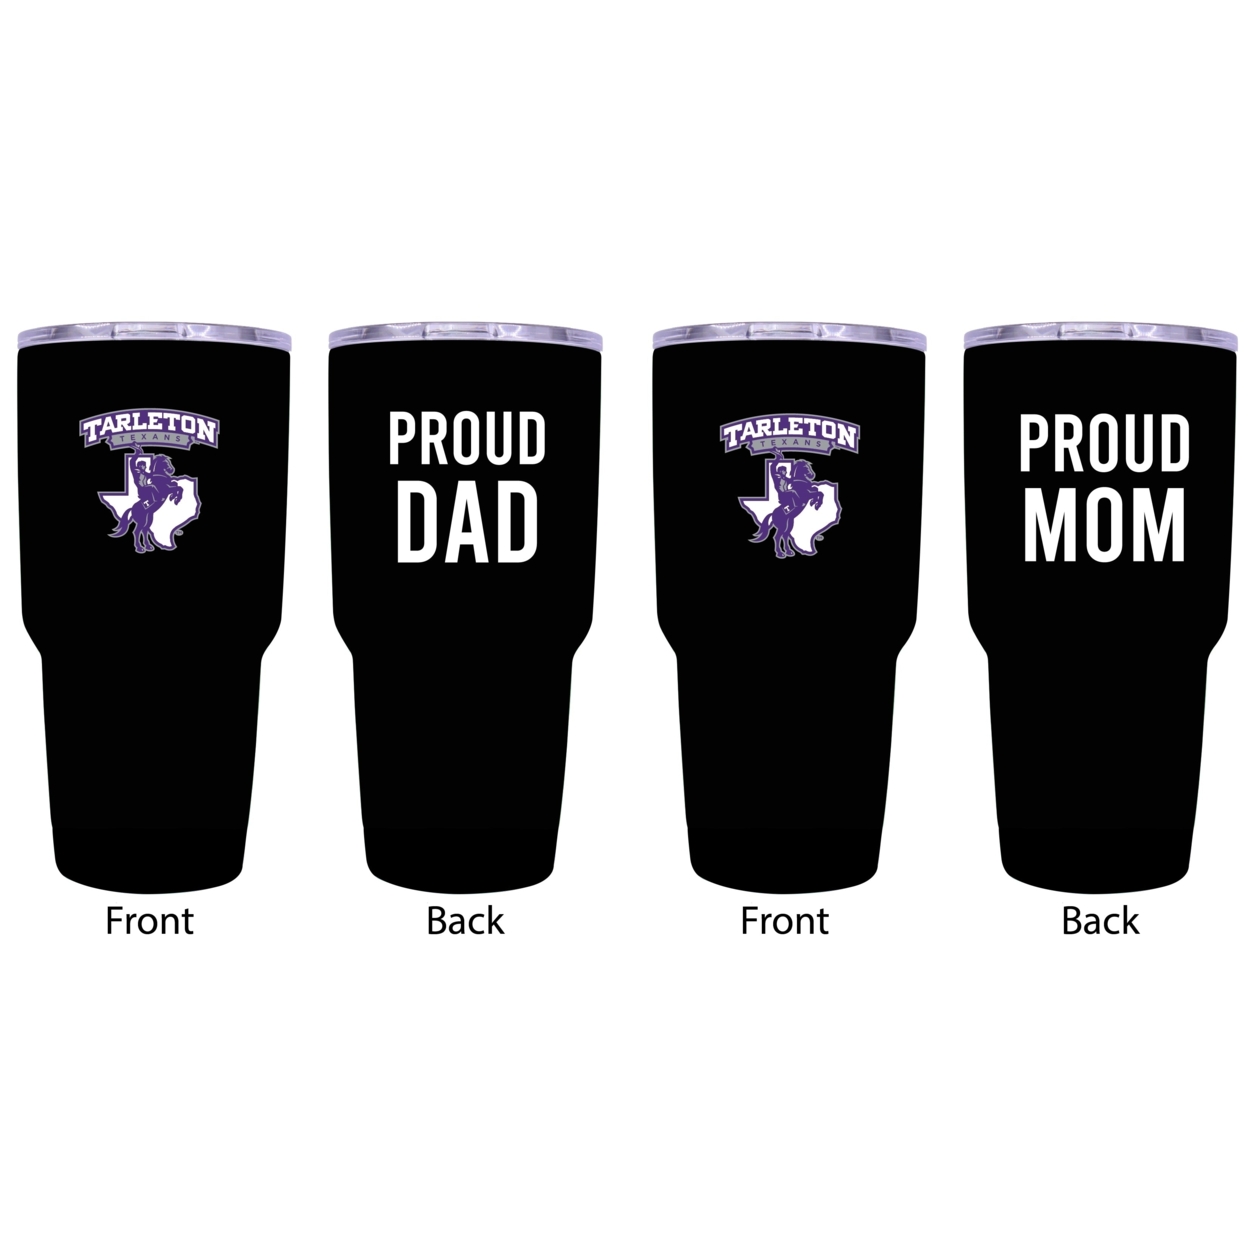 Tarleton State University Proud Mom And Dad 24 Oz Insulated Stainless Steel Tumblers 2 Pack Black.